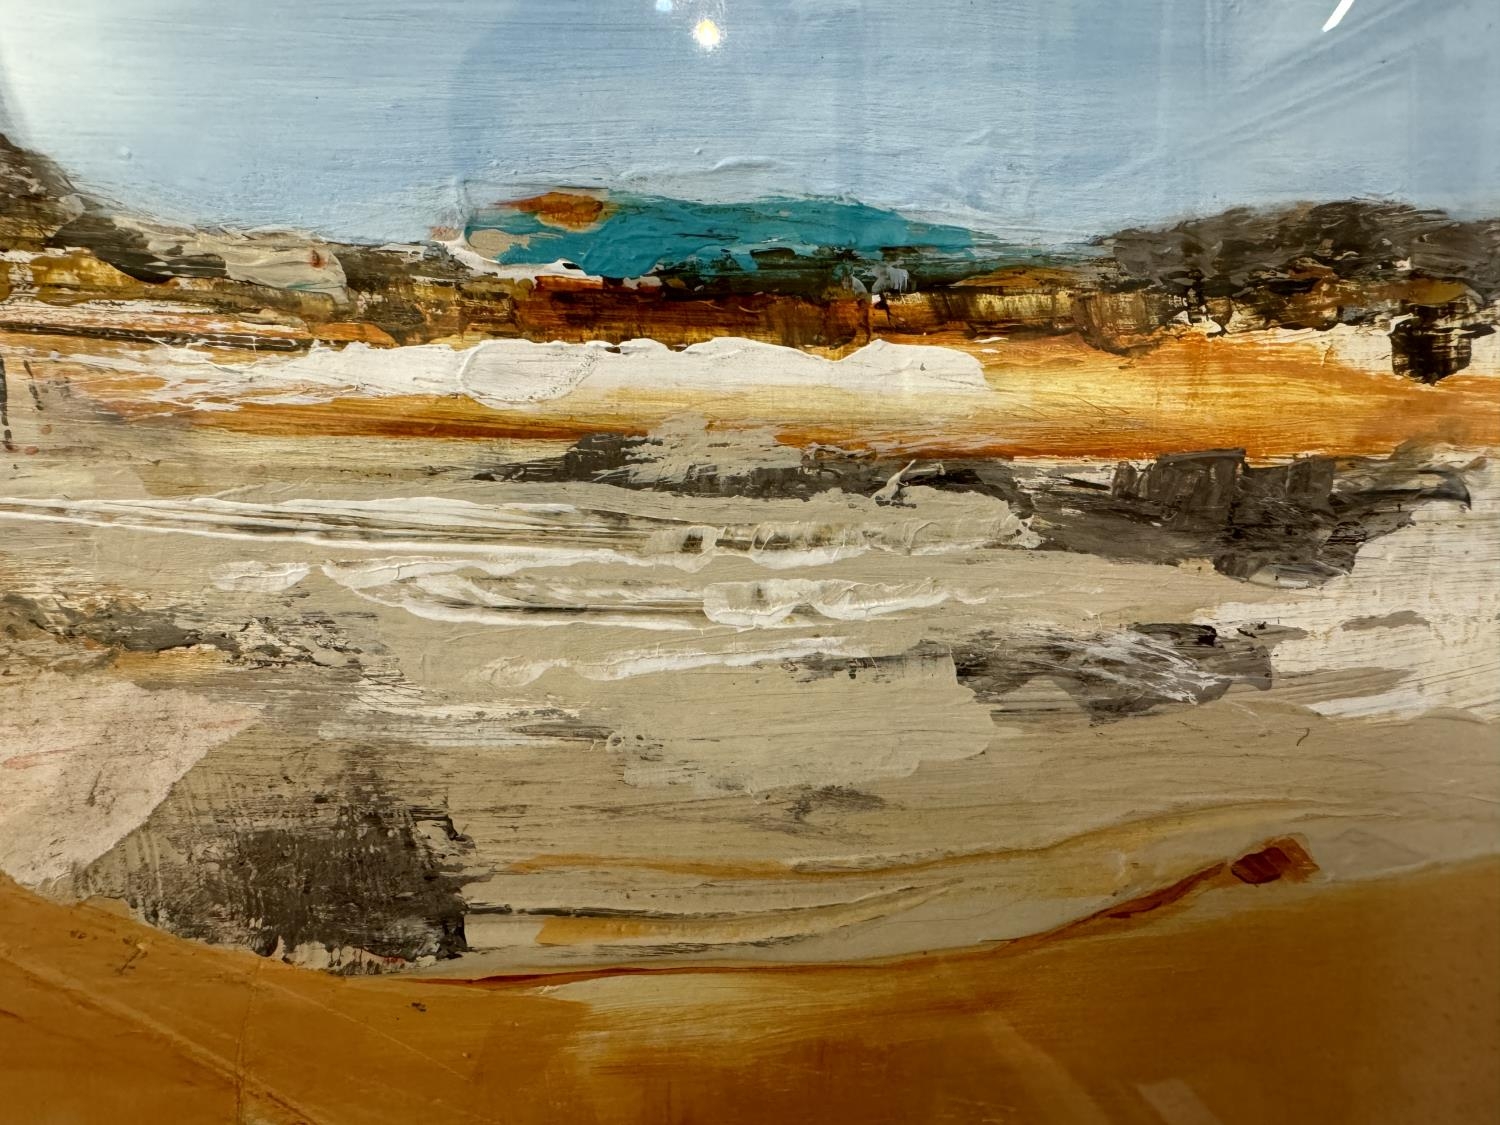 Bea Thompson - 'Fowey Estuary I' (2003), signed lower right, with title, medium and date inscribed - Image 3 of 6